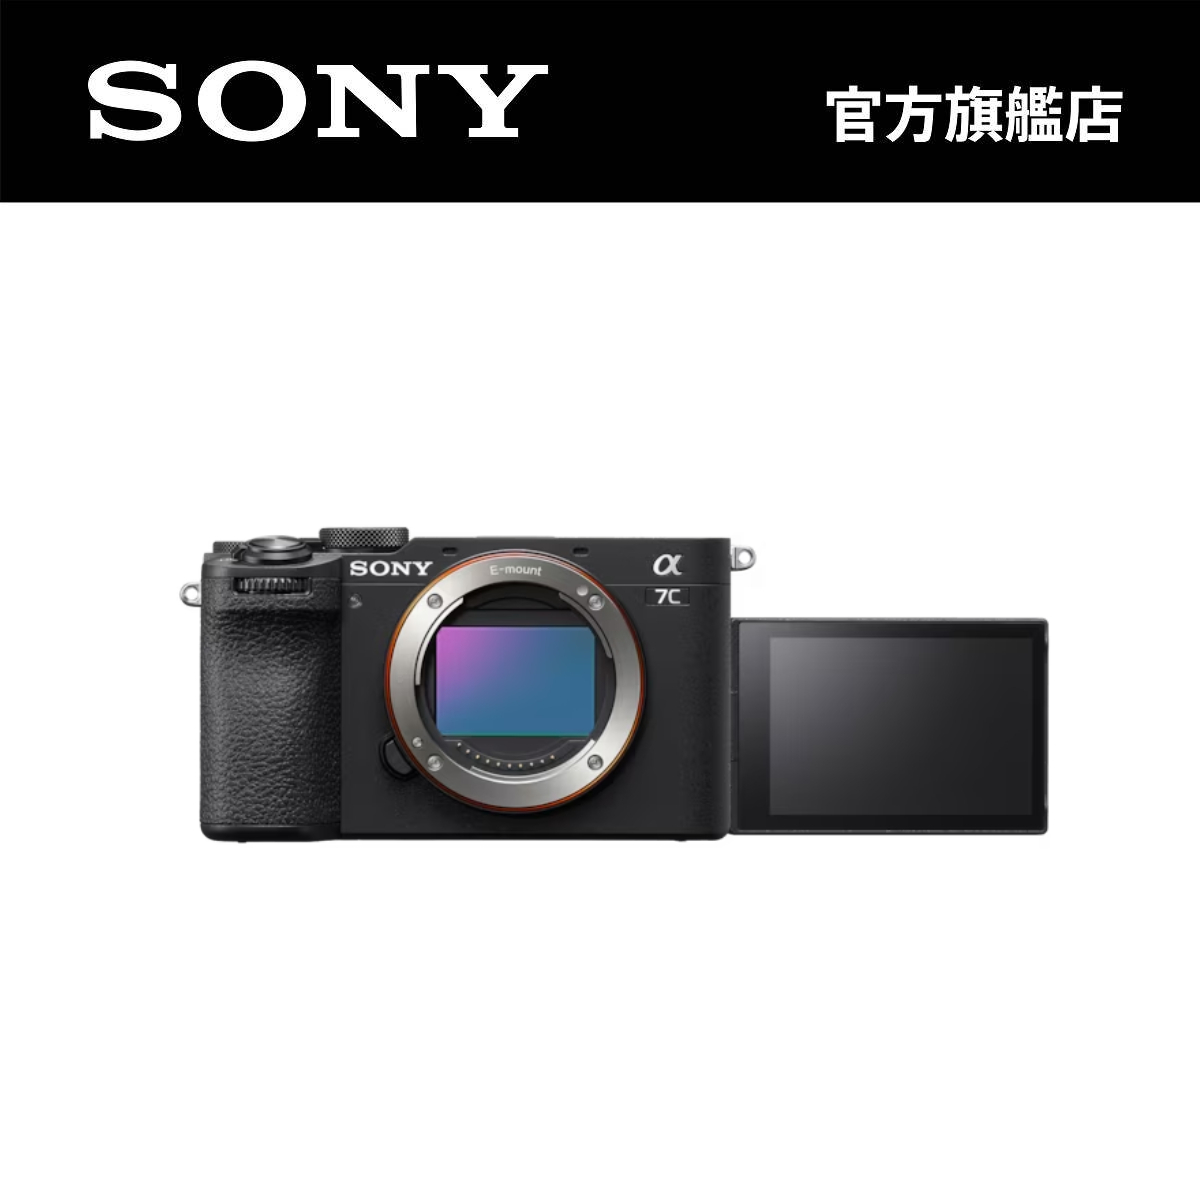 Sony ILCE-7C a7C Compact Full-Frame Camera, Black - ASK Outlets Ltd